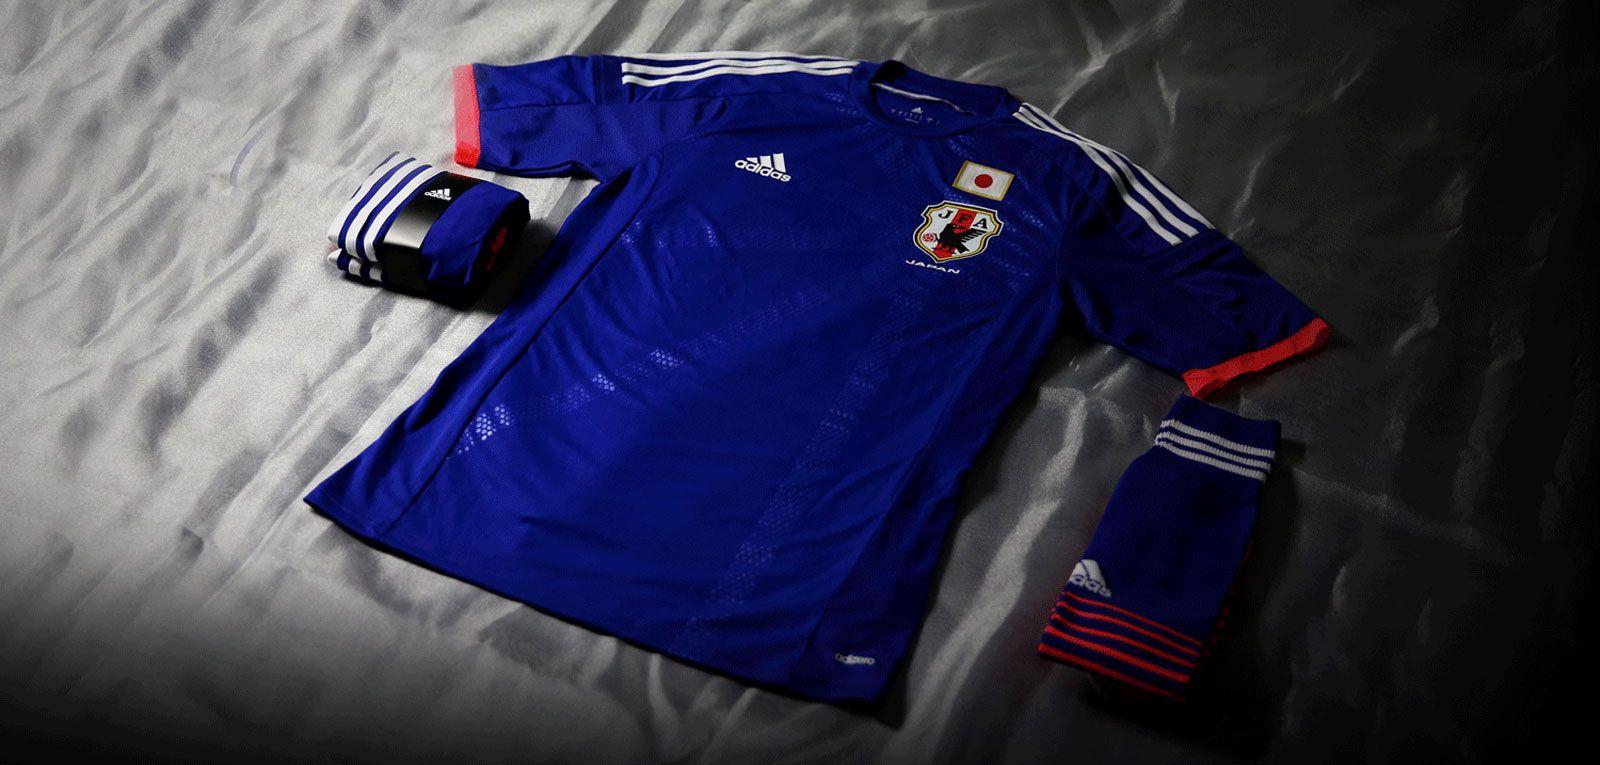 World Cup Jerseys In Photo: The uniforms at this summer's